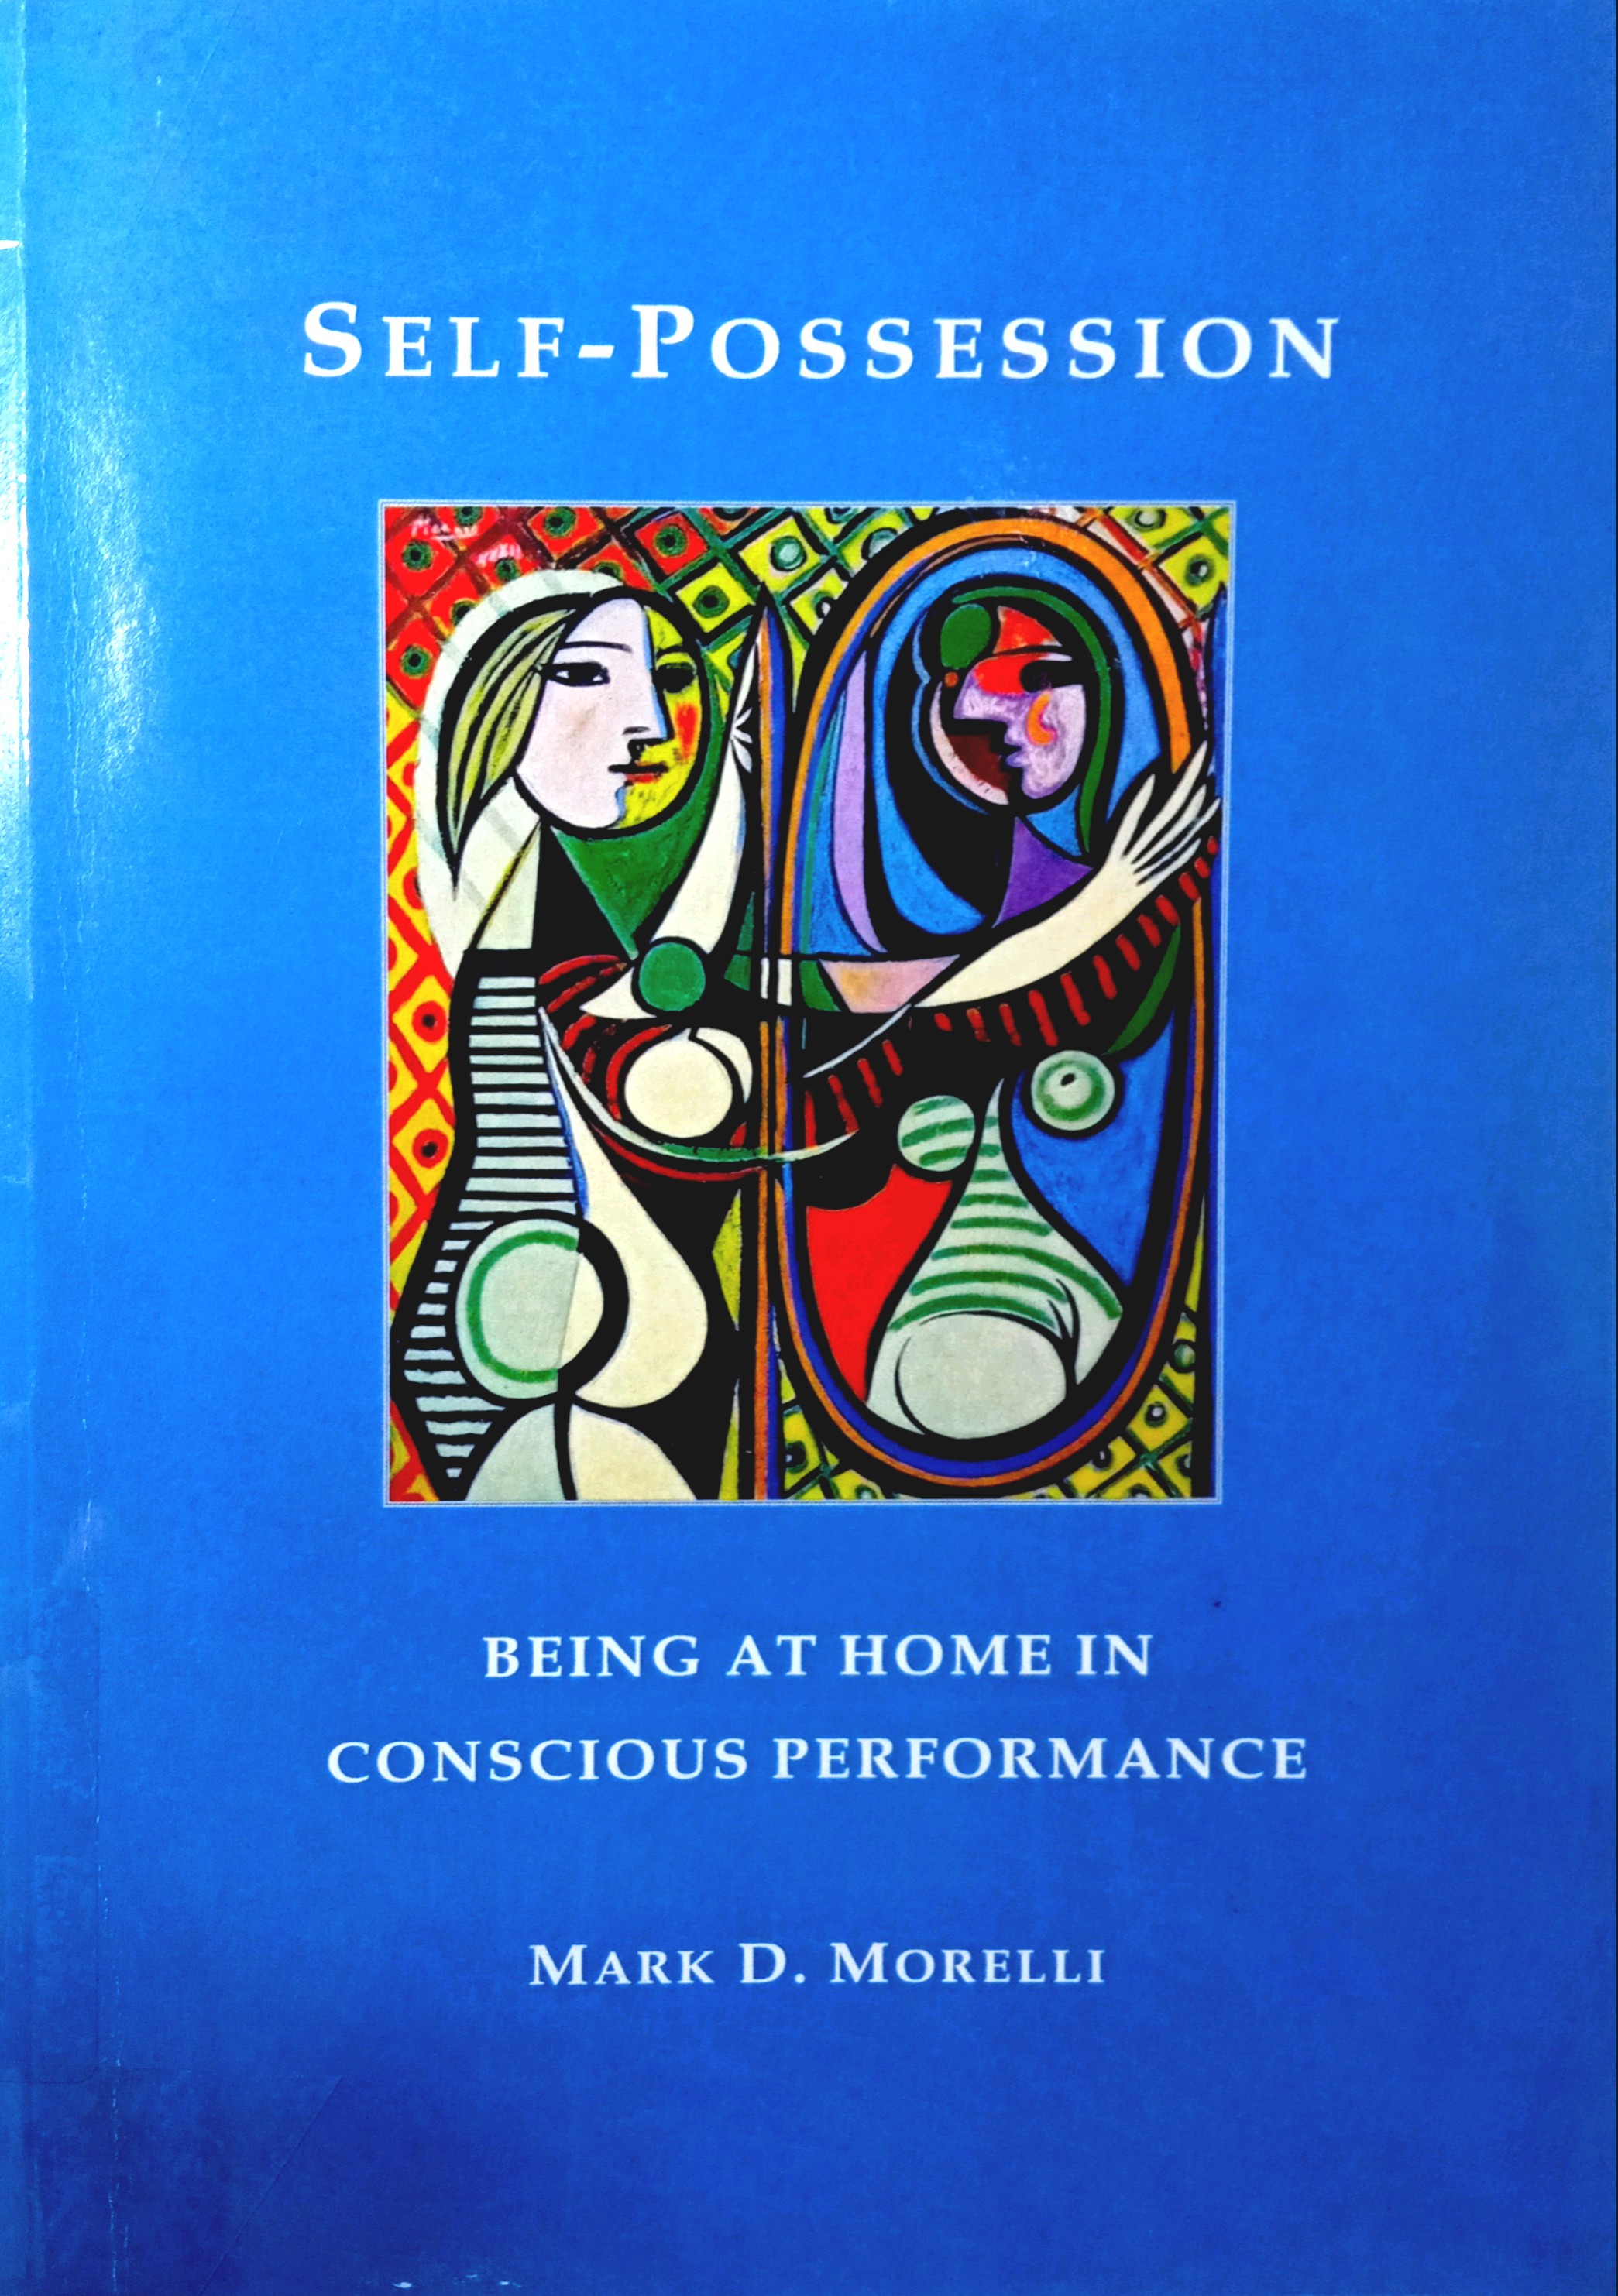 SELF-POSSESSION: BEING AT HOME IN CONSCIOUS PERFORMANCE